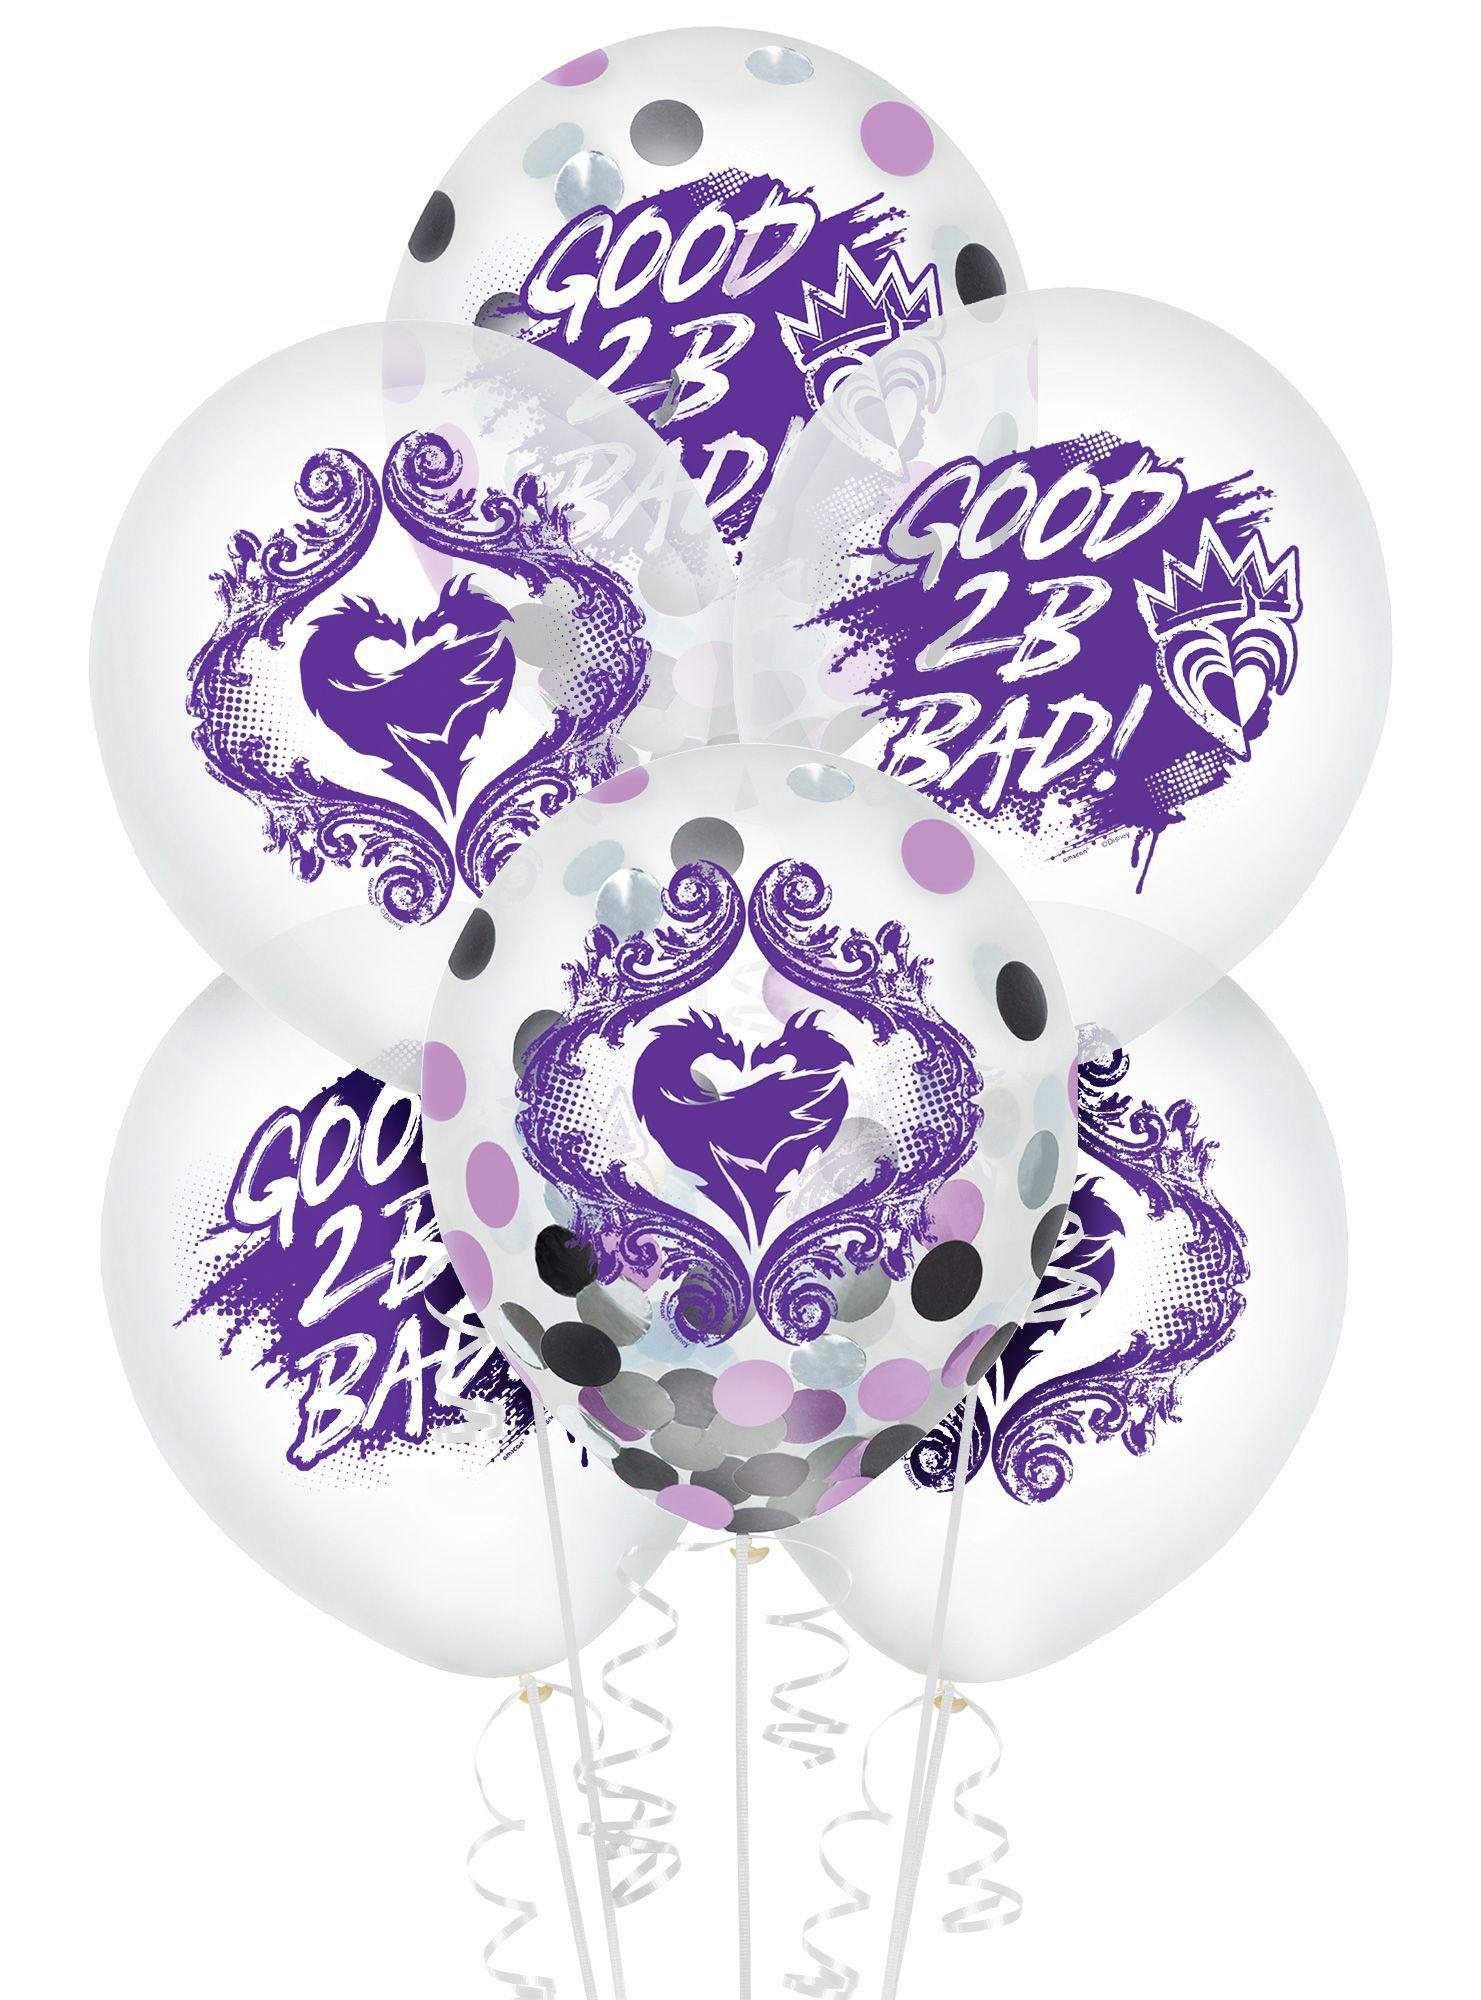 Descendants Birthday Party Balloon Decorations - 3 Pack Set Of Descendant  Balloons From The Disney TV Movie Series. Makes A Great Banner Backdrop Or  Bouquet To Compliment Other Descendants Party Suppl 